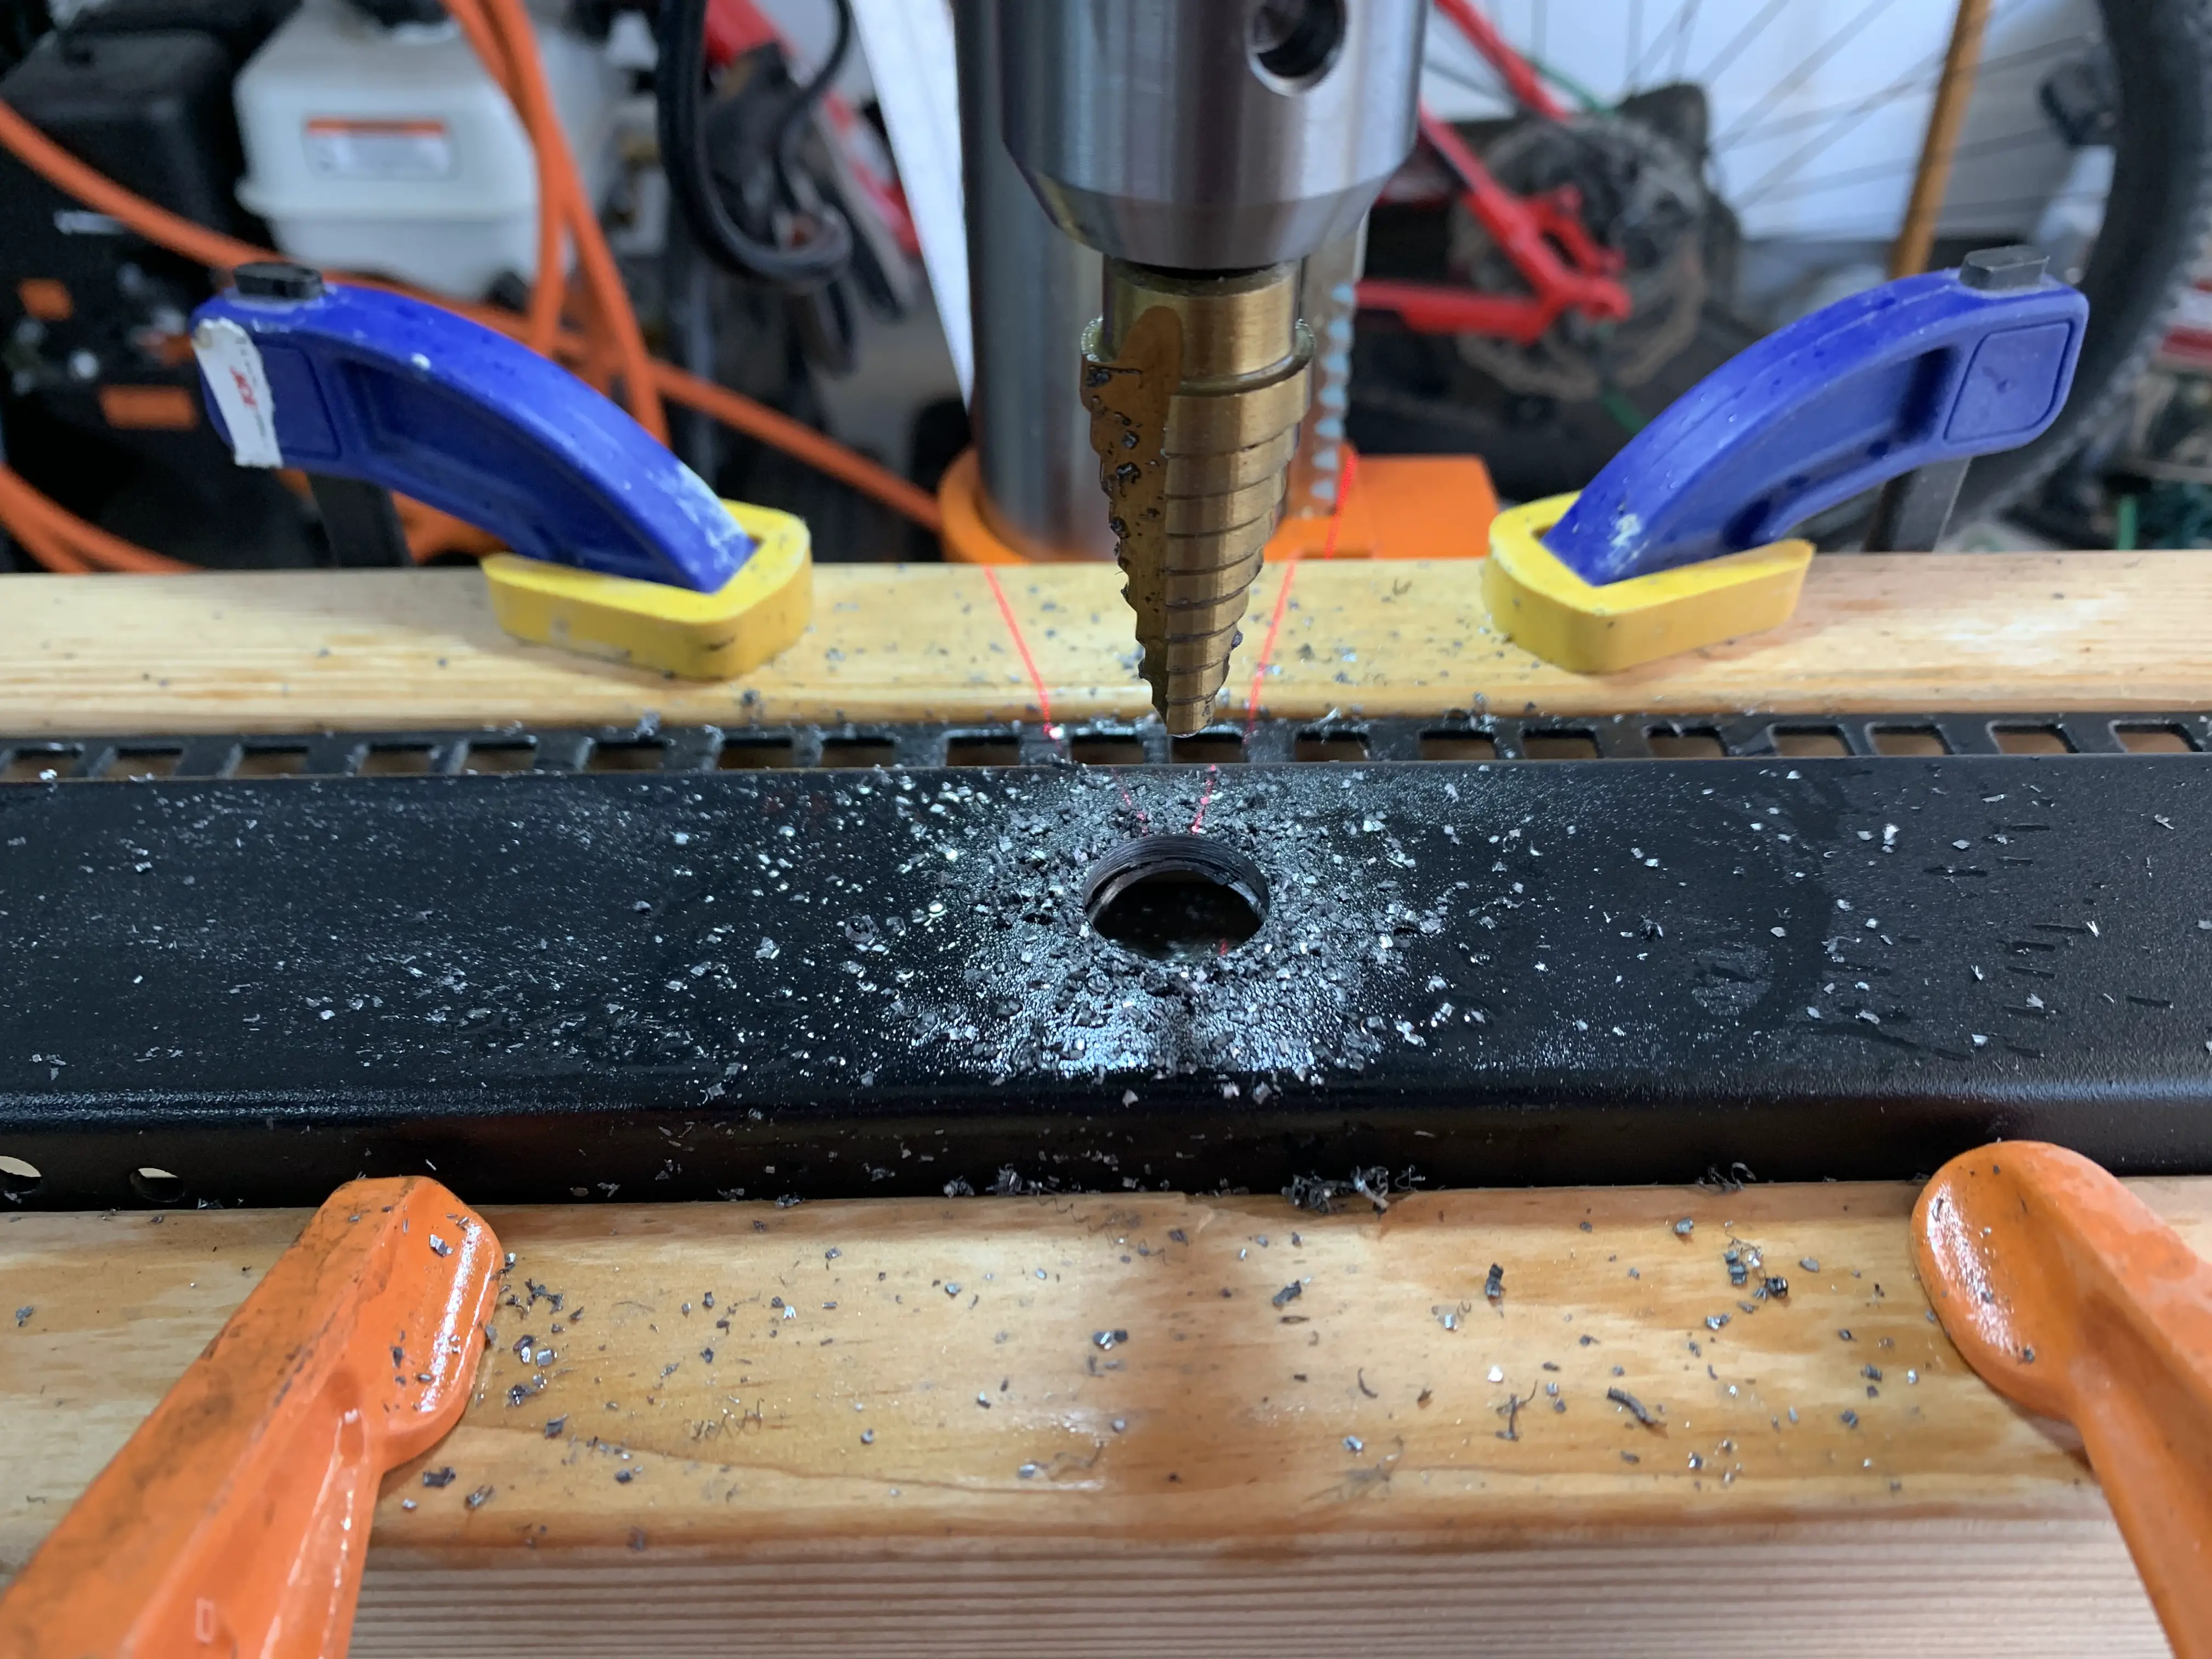 Drilling test hole with drill press in old server rack post